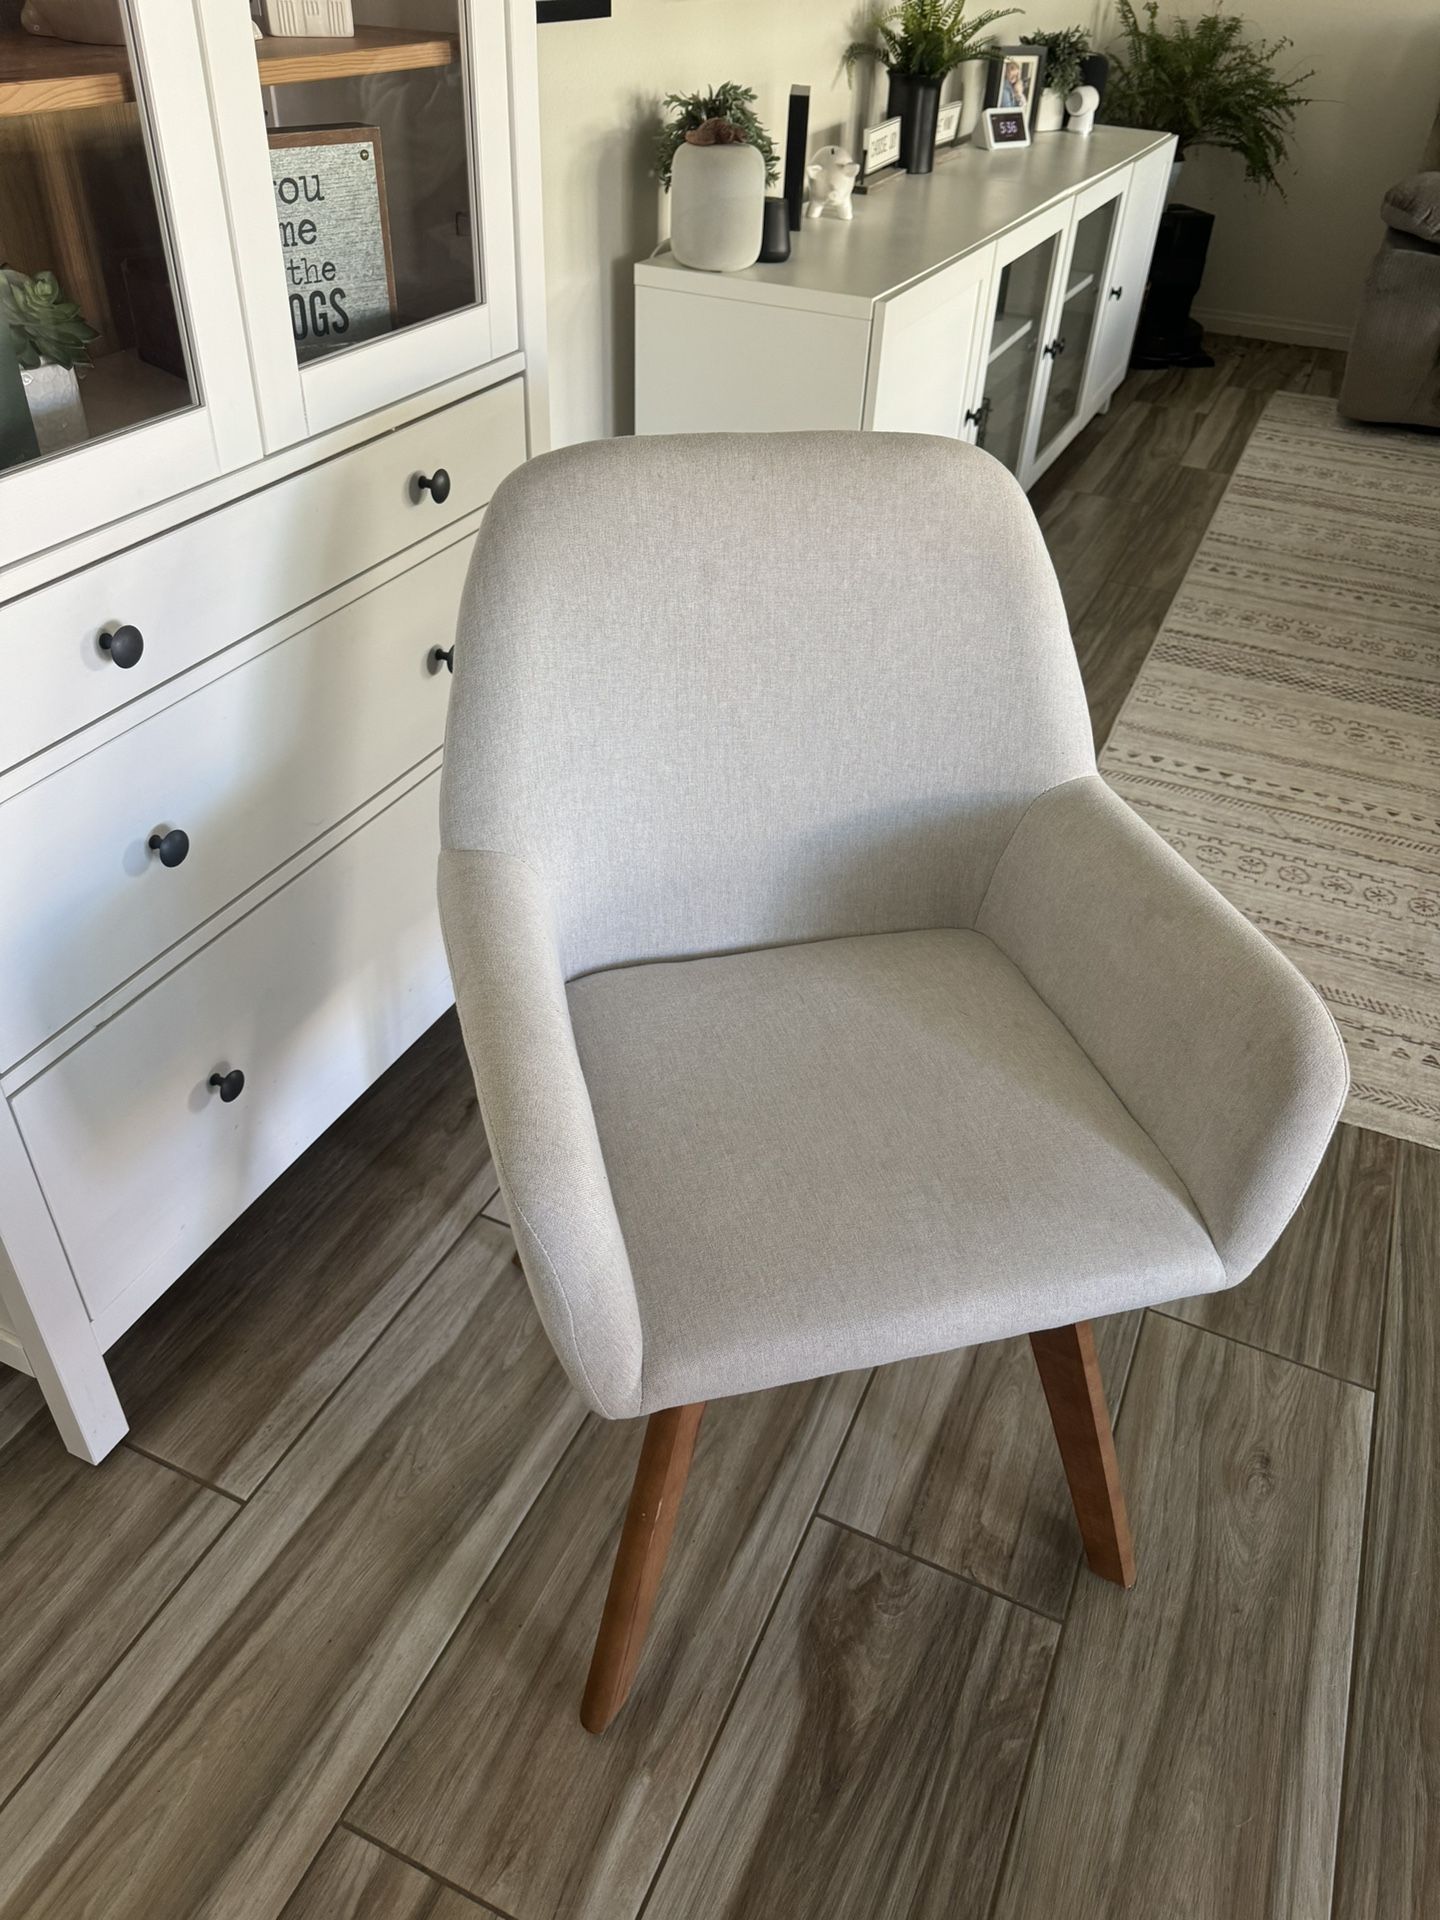 Dinning Chair Desk Chair No Wheels, Mid Century Modern 360 Swivel Accent Chair, Linen Fabric Upholstered Armchairs with Wood Legs, Off White $100 Each